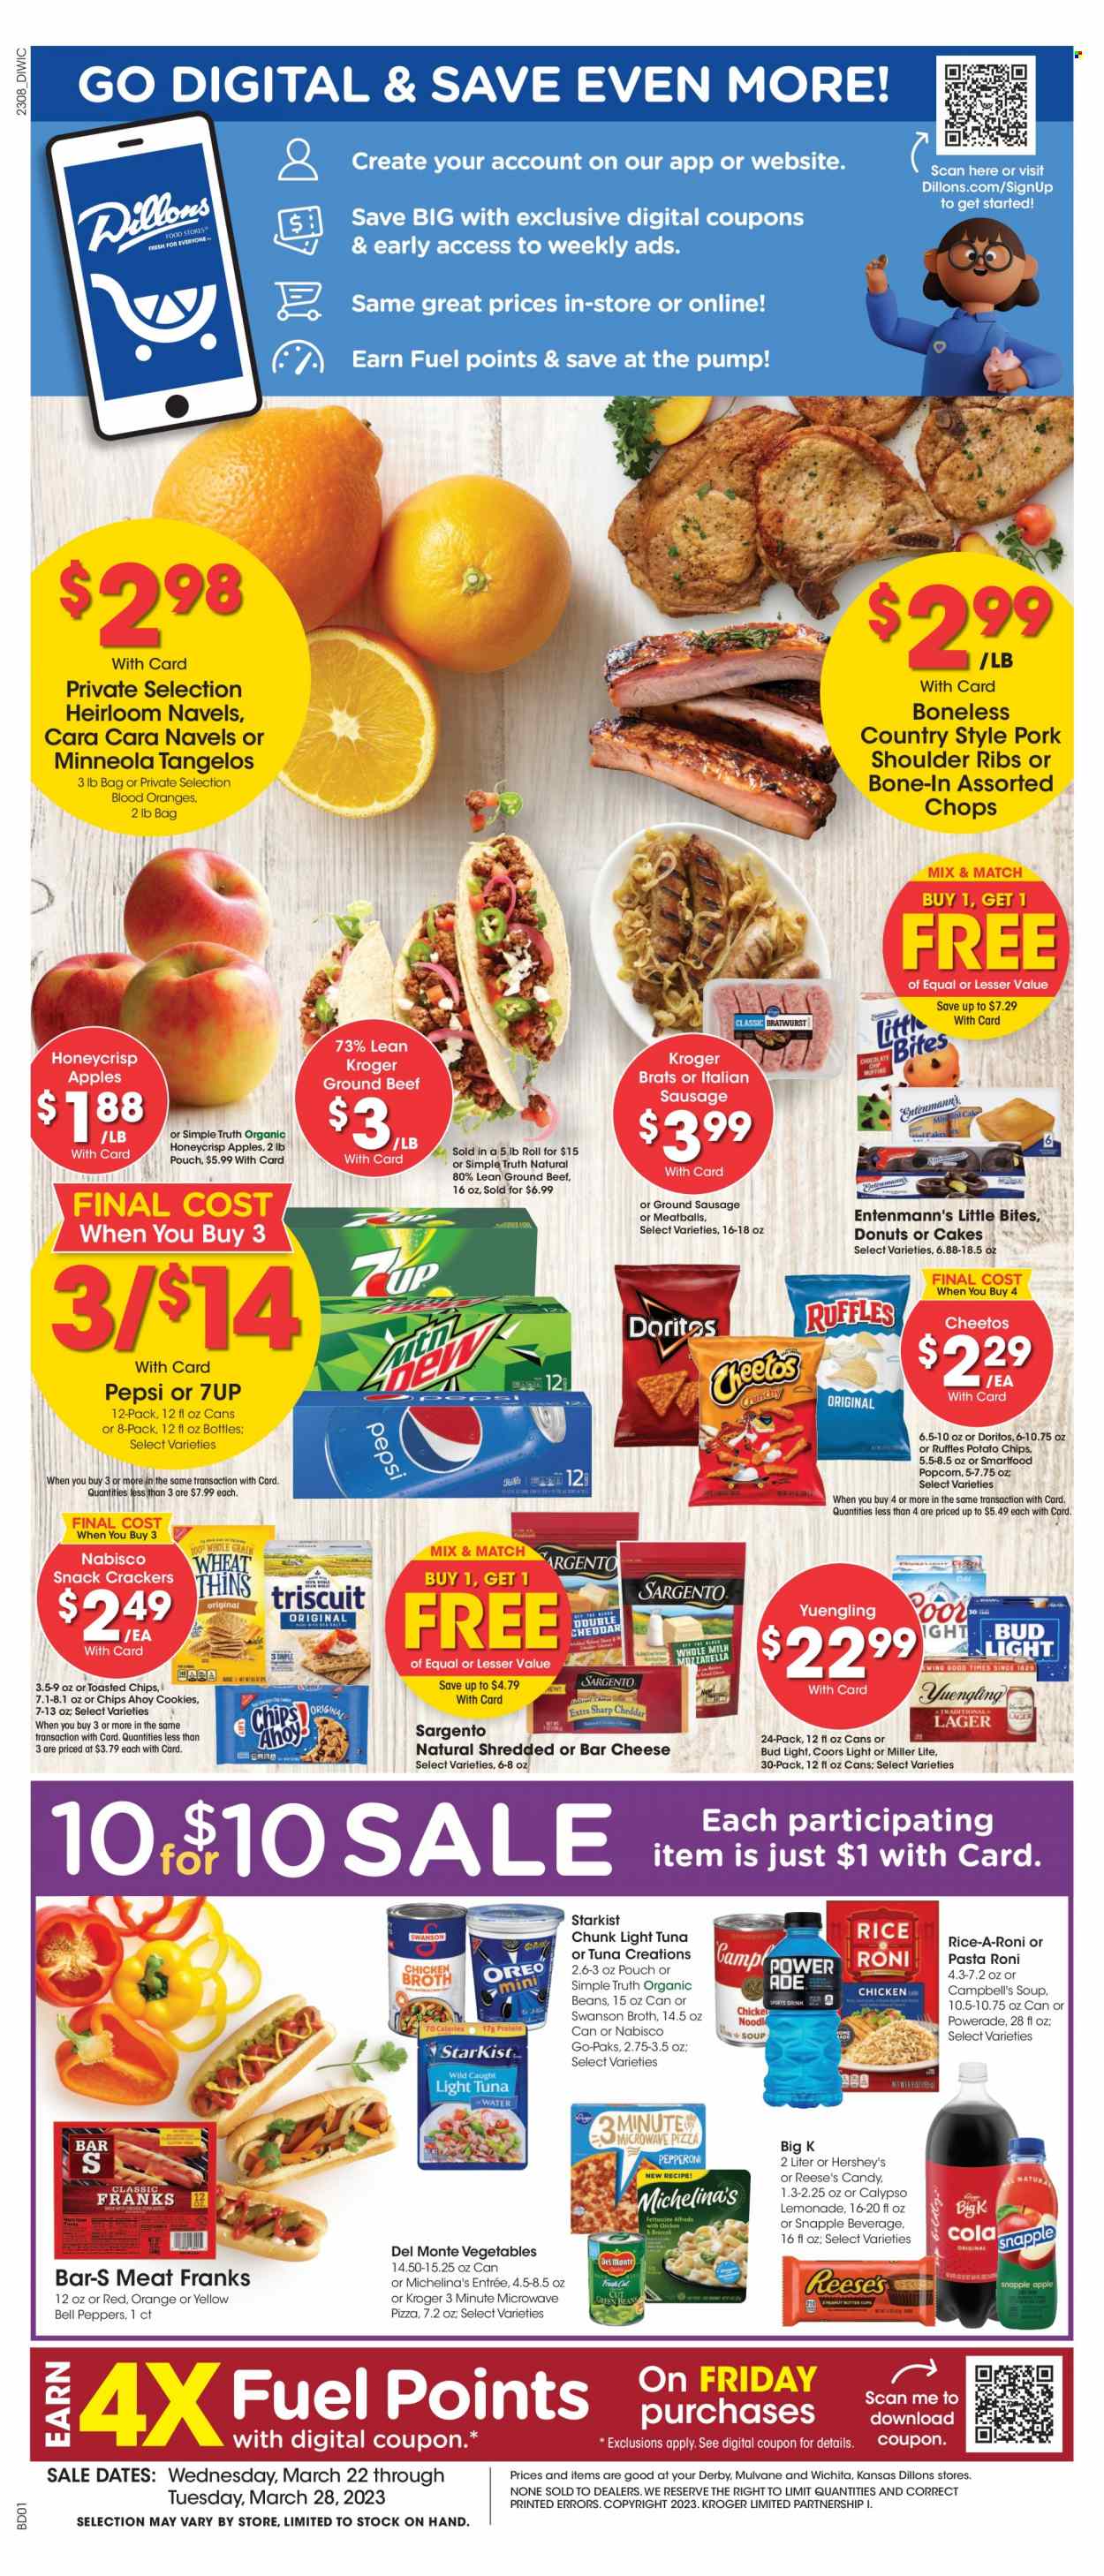 thumbnail - Dillons Flyer - 03/22/2023 - 03/28/2023 - Sales products - cake, donut, Entenmann's, apples, tangelos, oranges, tuna, StarKist, Campbell's, pizza, meatballs, soup, sausage, italian sausage, Sargento, Reese's, Hershey's, cookies, snack, crackers, Little Bites, Doritos, potato chips, Cheetos, chips, Smartfood, popcorn, broth, light tuna, Del Monte, rice, lemonade, Powerade, Pepsi, 7UP, Snapple, beer, Bud Light, beef meat, ground beef, ribs, pork meat, pork shoulder, pump, Miller Lite, Coors, Yuengling, navel oranges. Page 1.